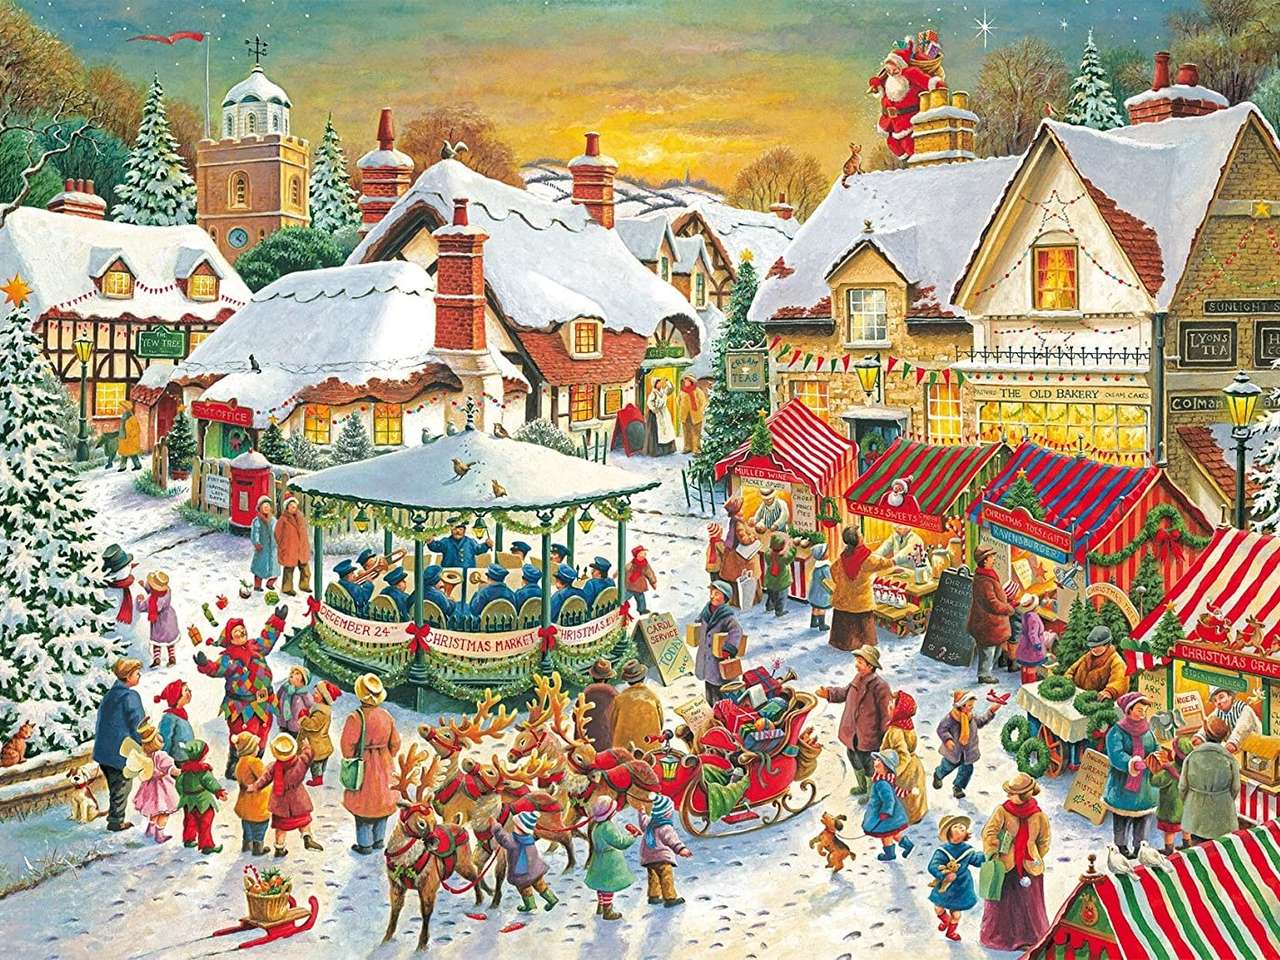 Christmas mood in the town jigsaw puzzle online